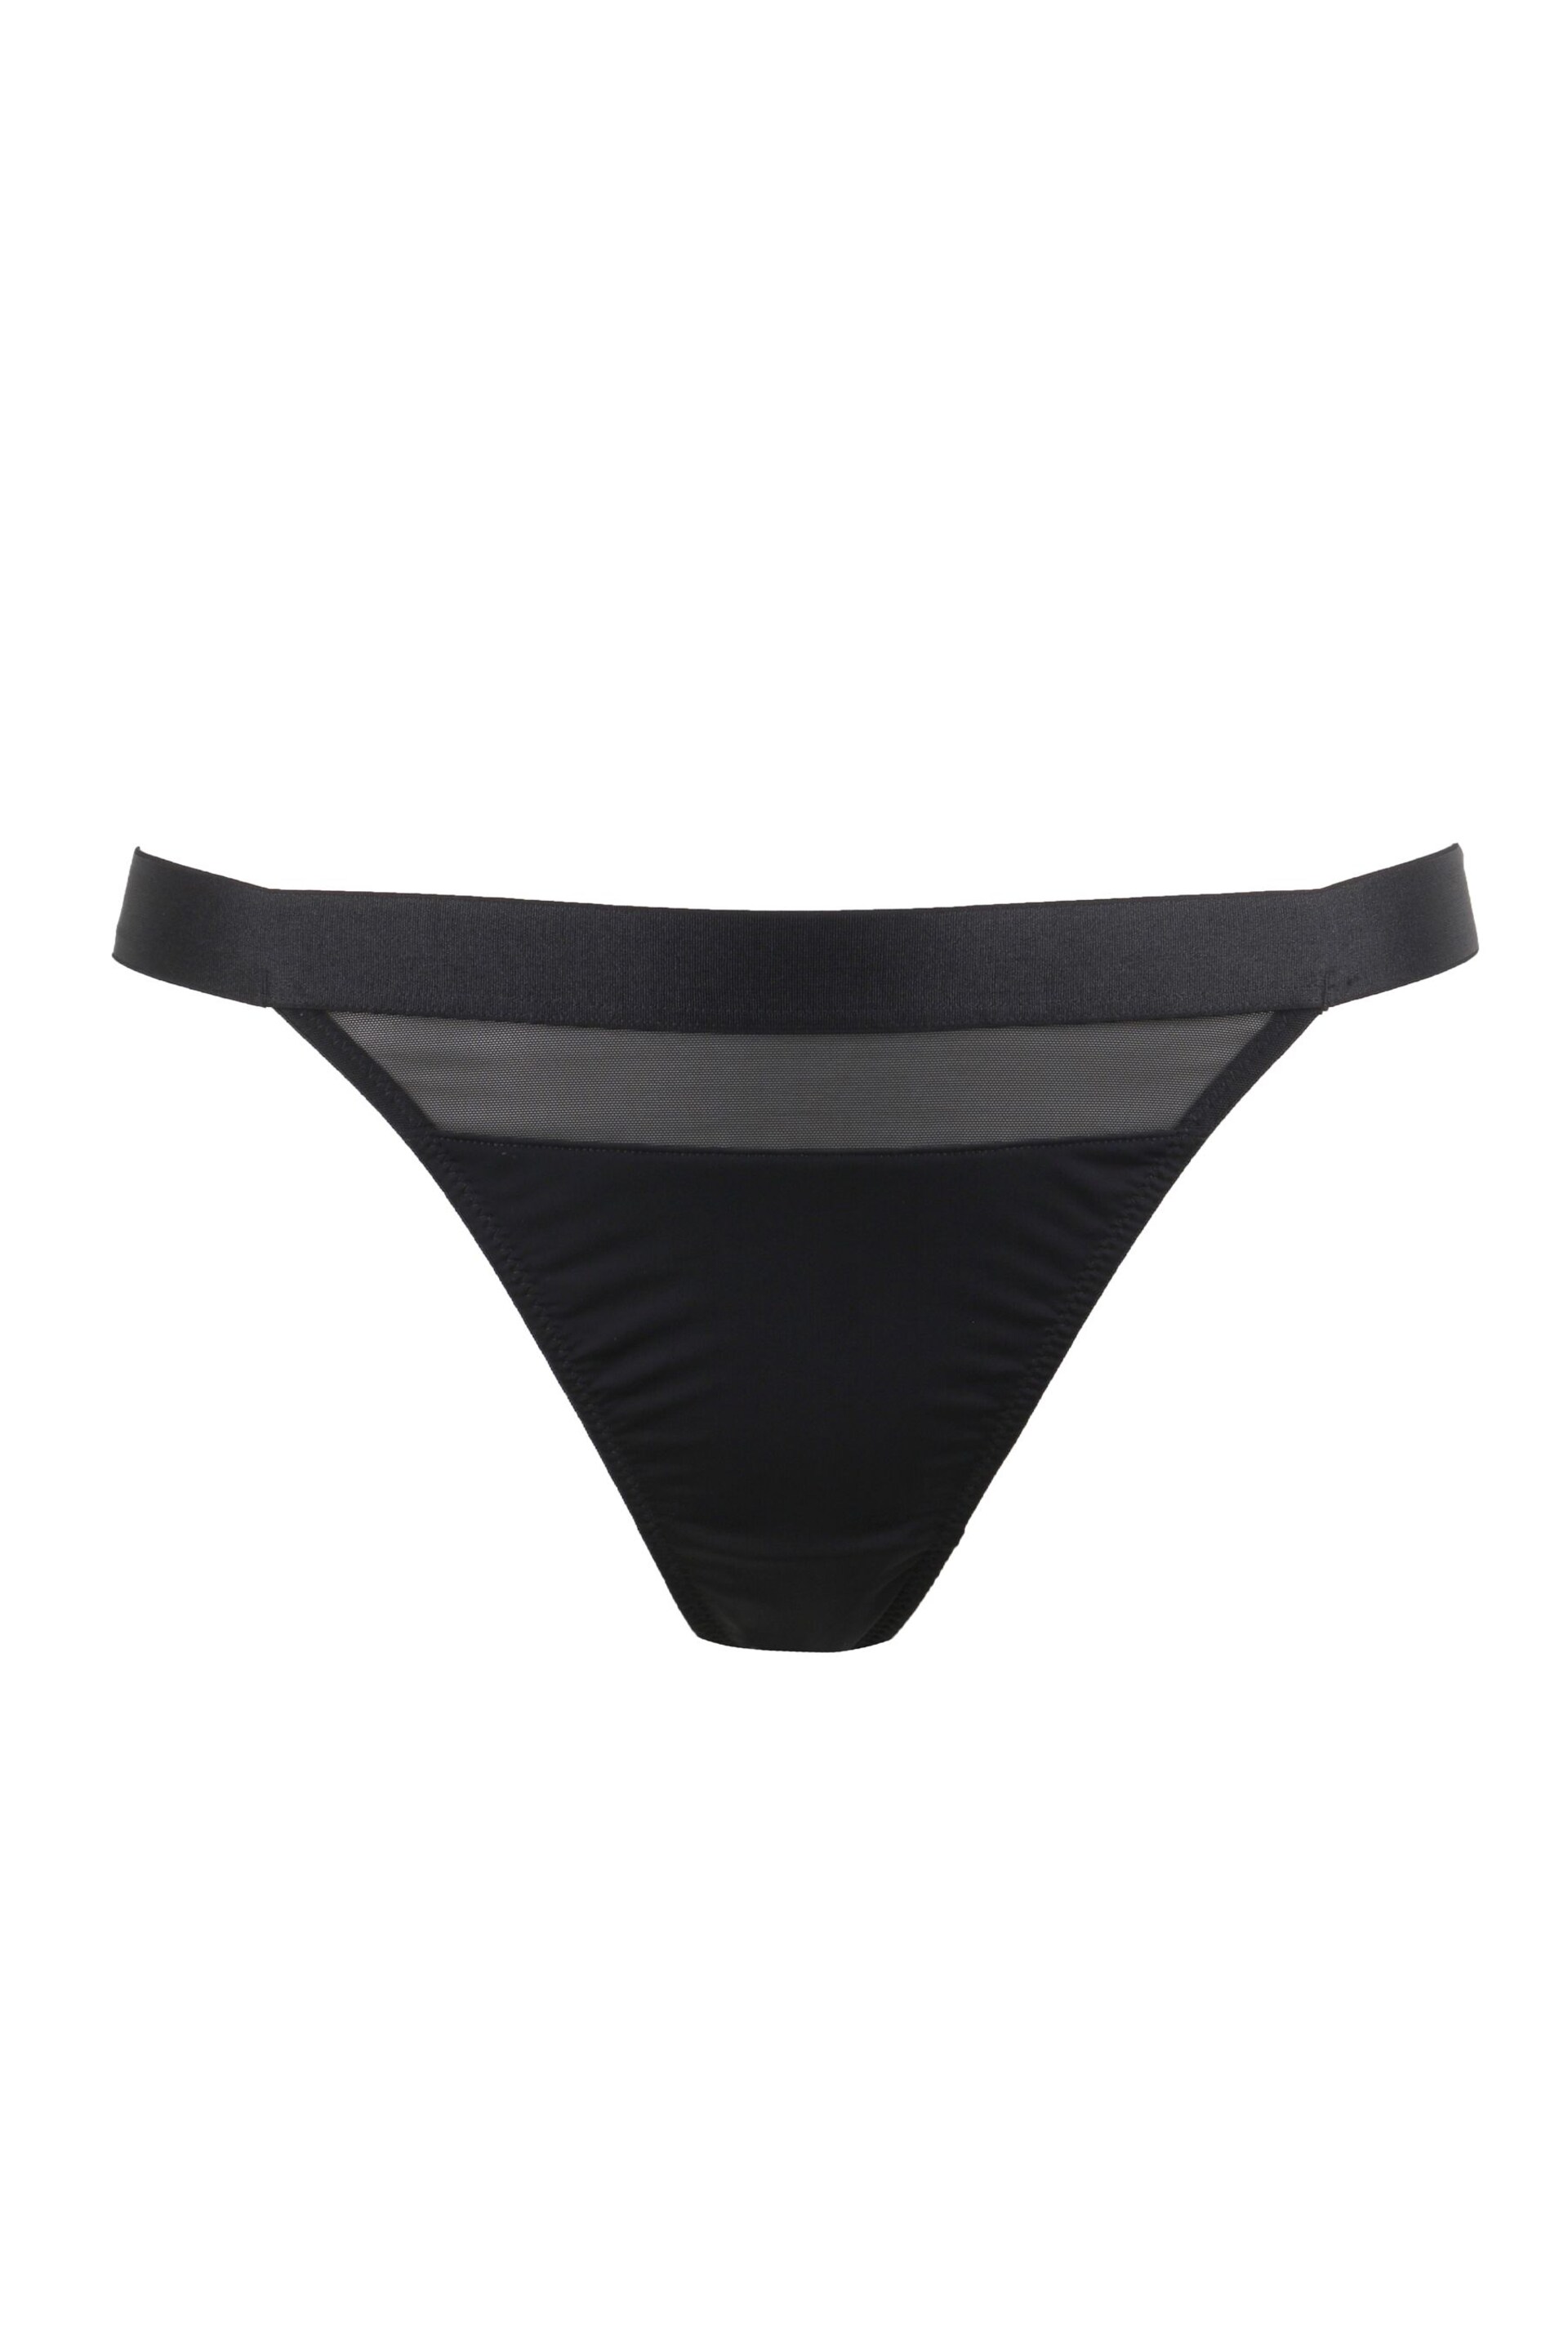 Pour Moi Black Thong India High Leg Thong Knickers - Image 3 of 4